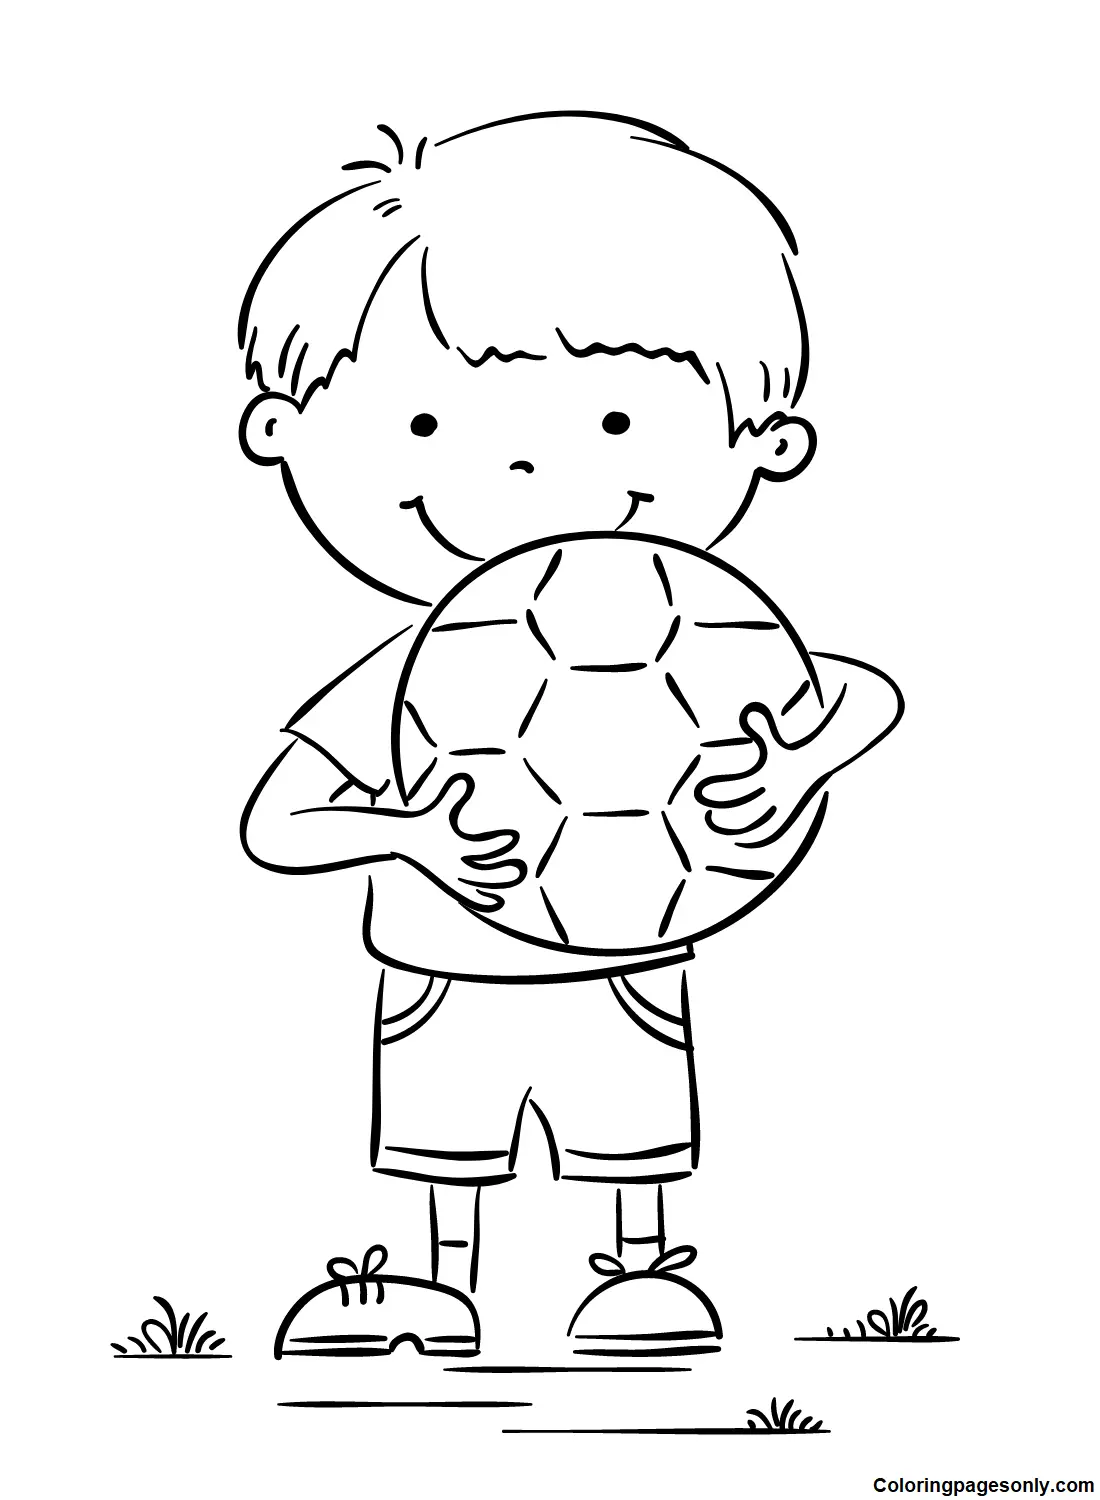 Boyish Coloring Pages